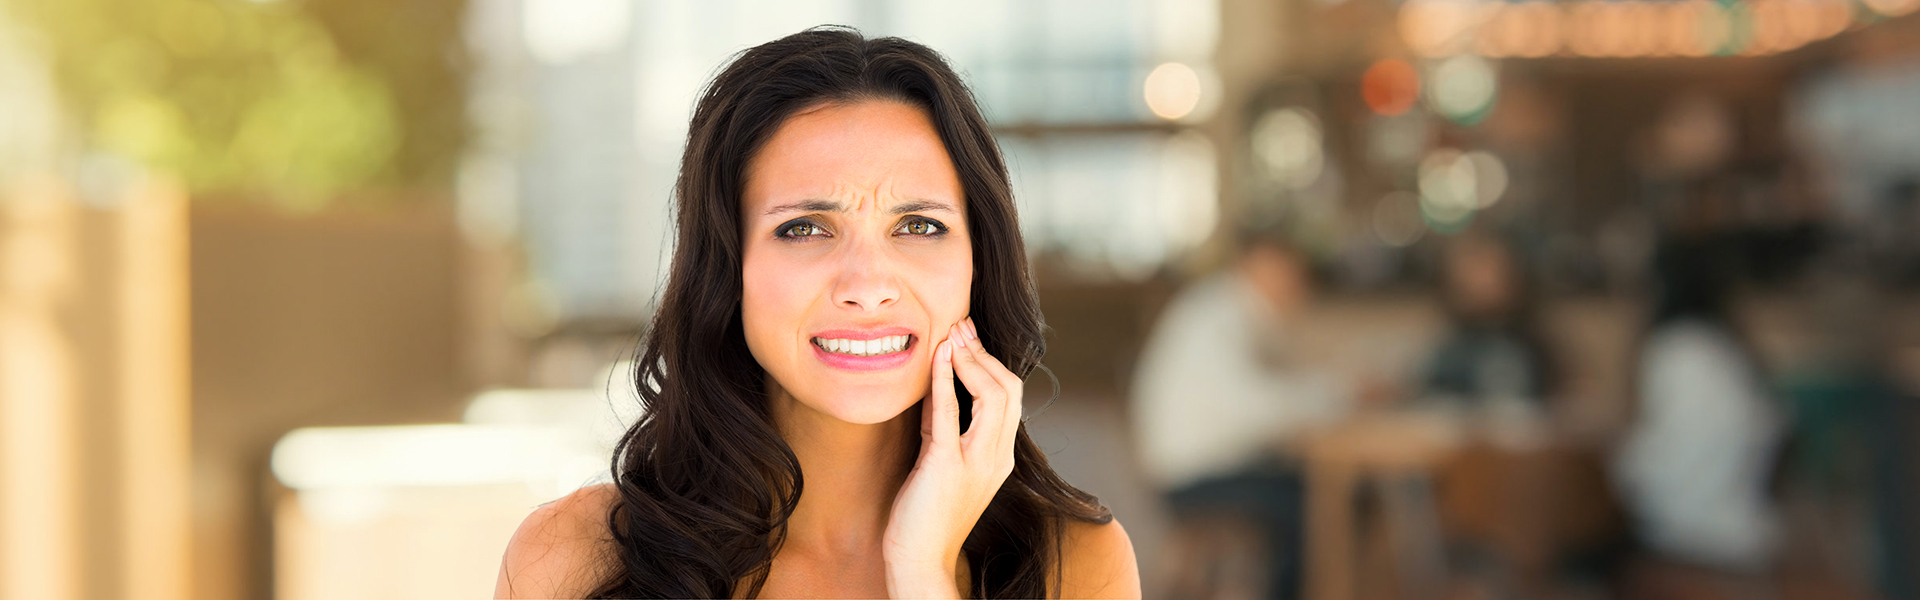 Is a Tooth Abscess a Dental Emergency, and Should You Seek Urgent Care?